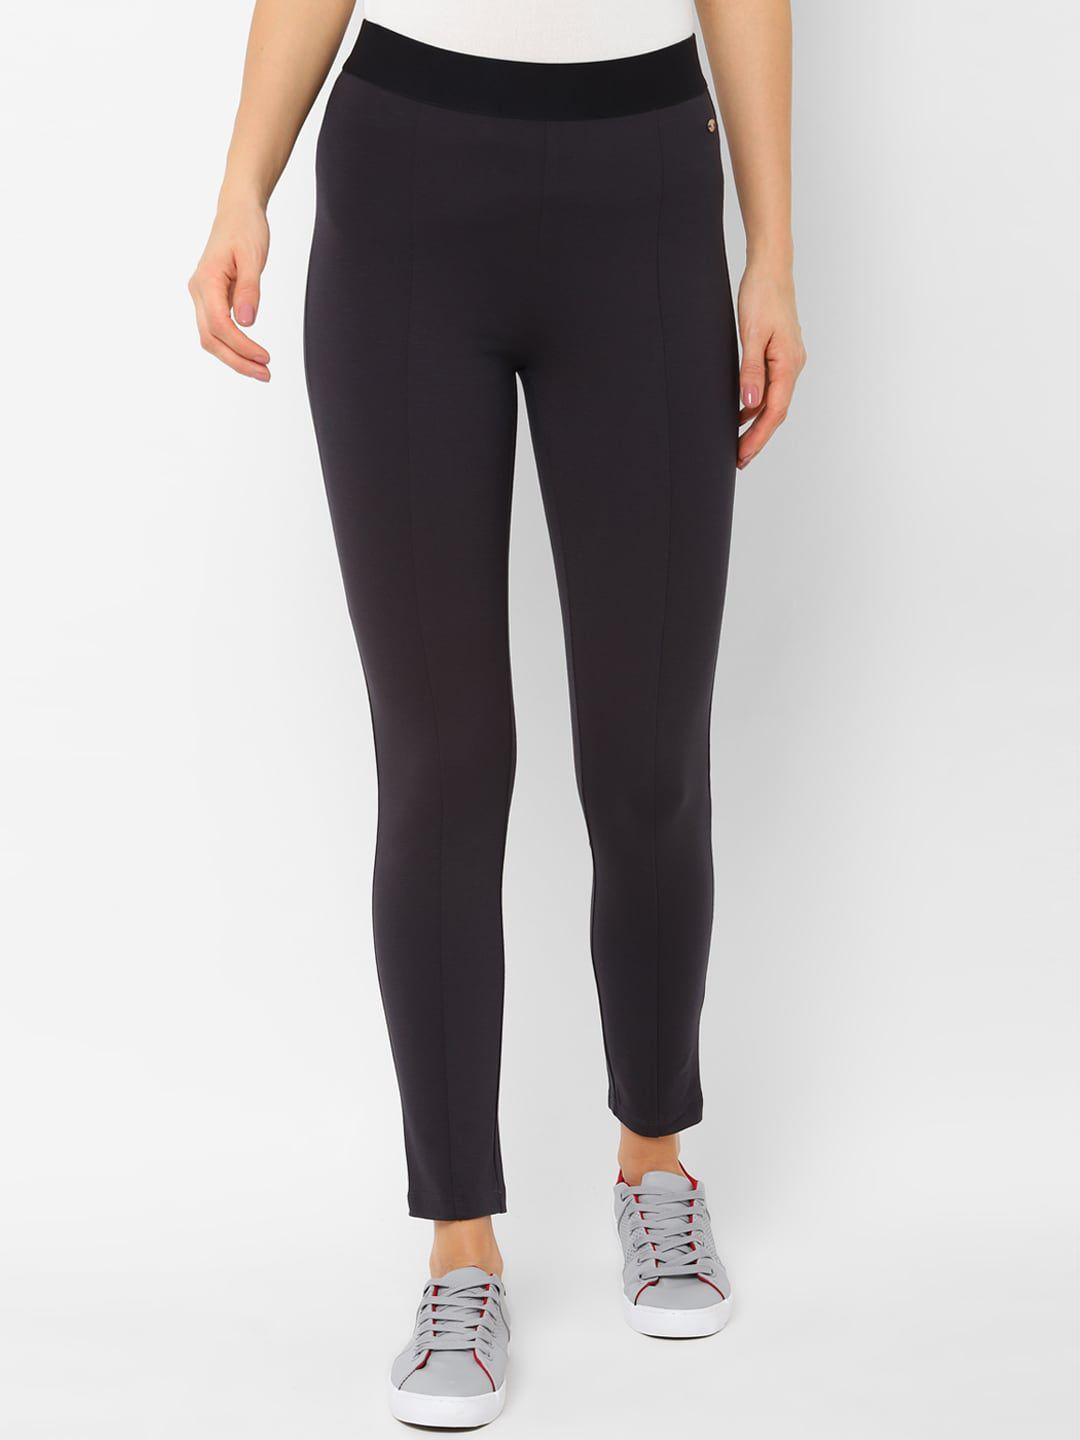 allen-solly-woman-charcoal-grey-regular-fit-solid-jeggings